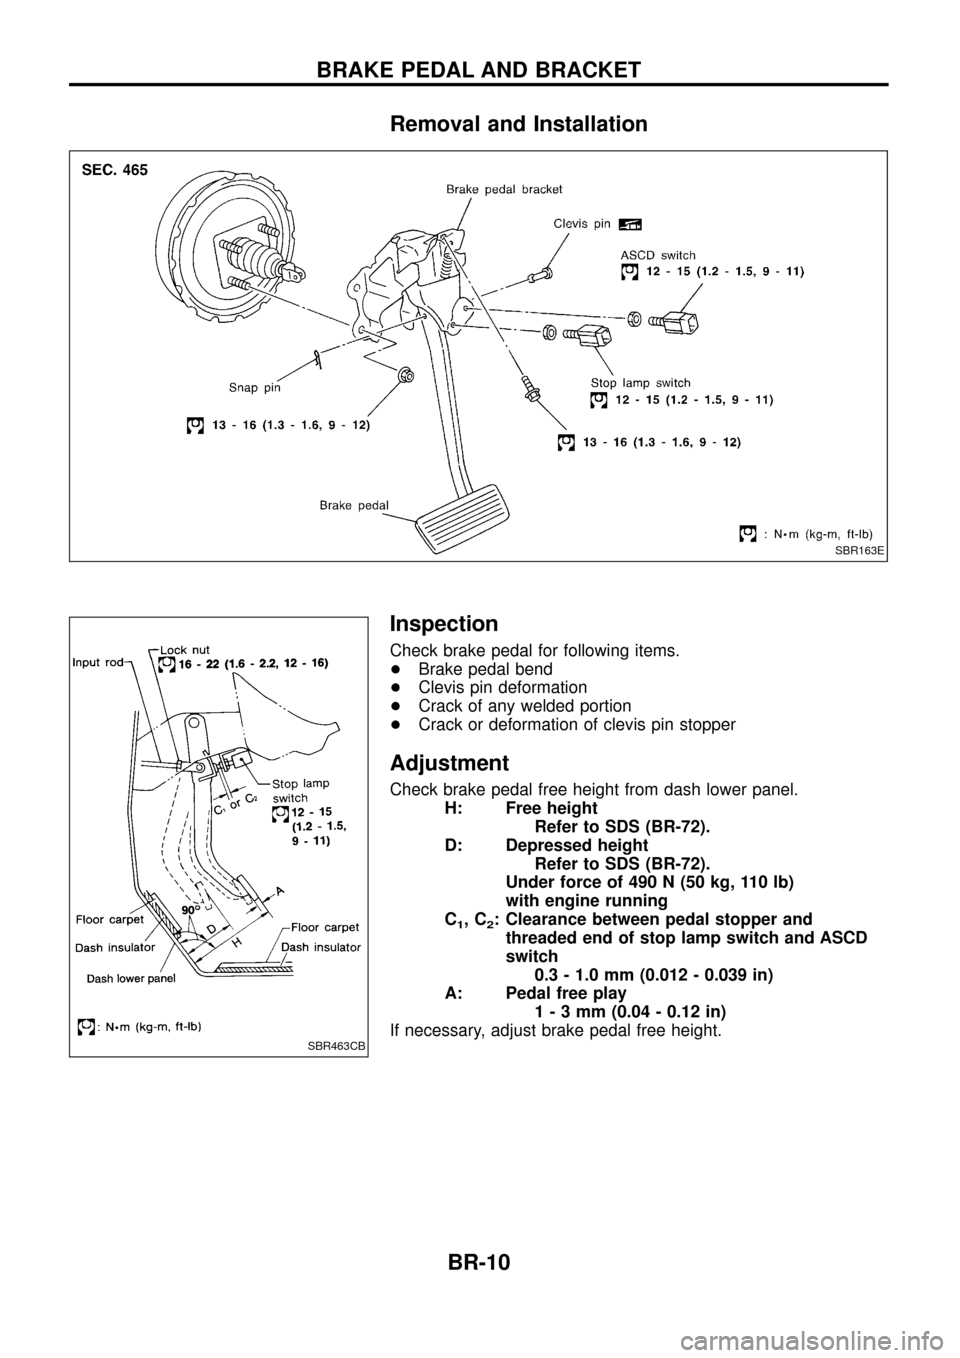 NISSAN PATROL 1998 Y61 / 5.G Brake System Workshop Manual Removal and Installation
Inspection
Check brake pedal for following items.
+Brake pedal bend
+ Clevis pin deformation
+ Crack of any welded portion
+ Crack or deformation of clevis pin stopper
Adjustm